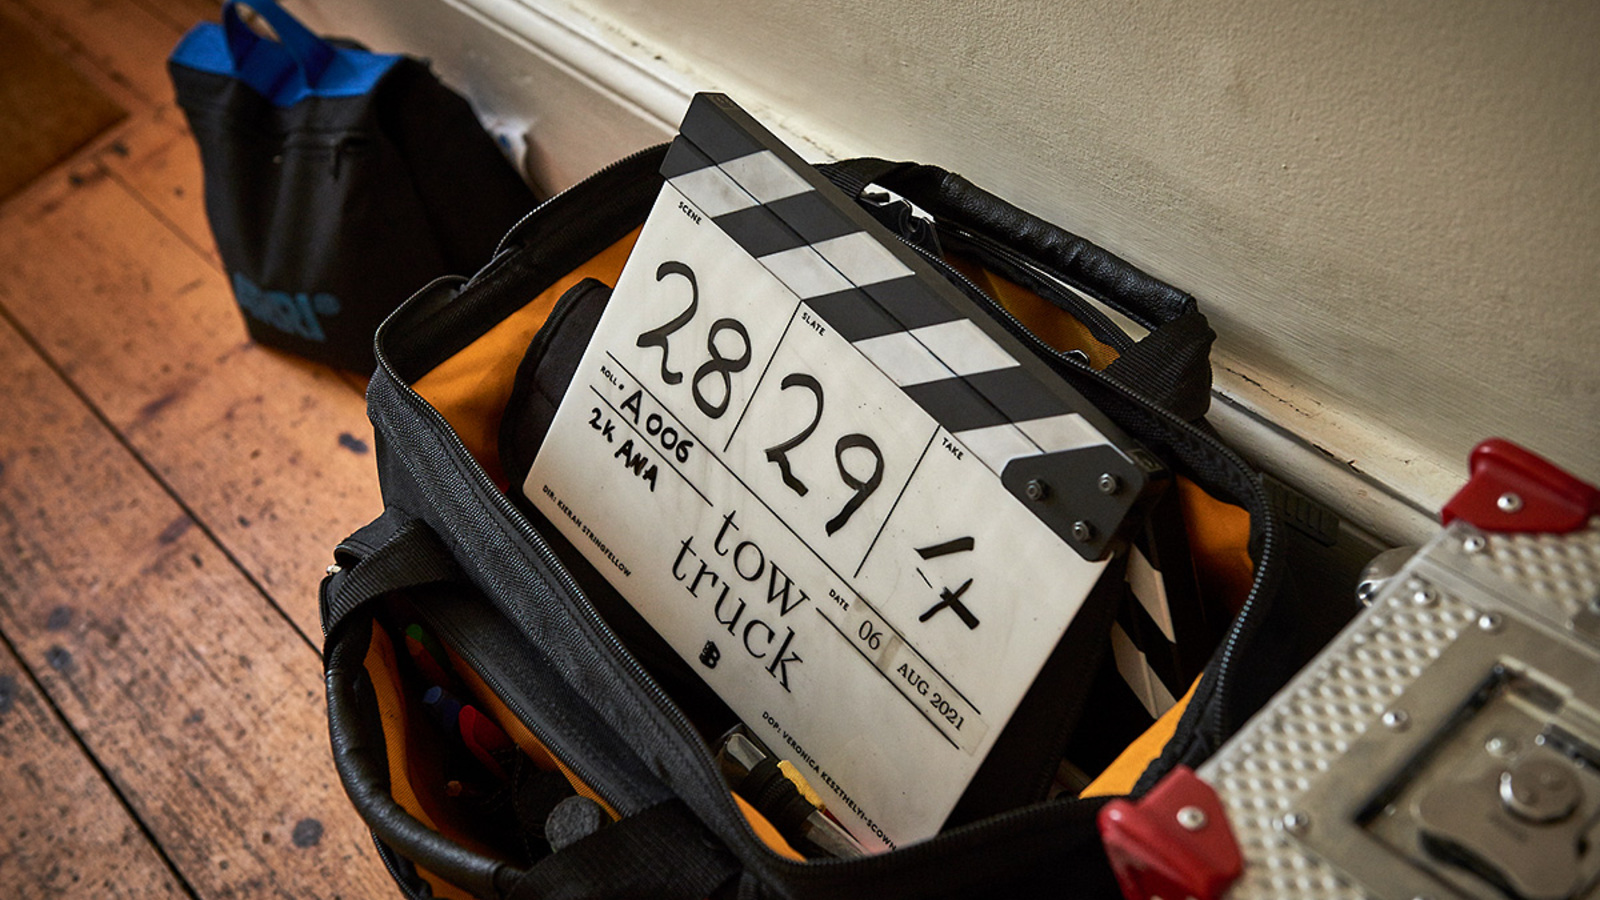 Behind the scenes on TOW TRUCK, a clapperboard sticking out of an equipment bag